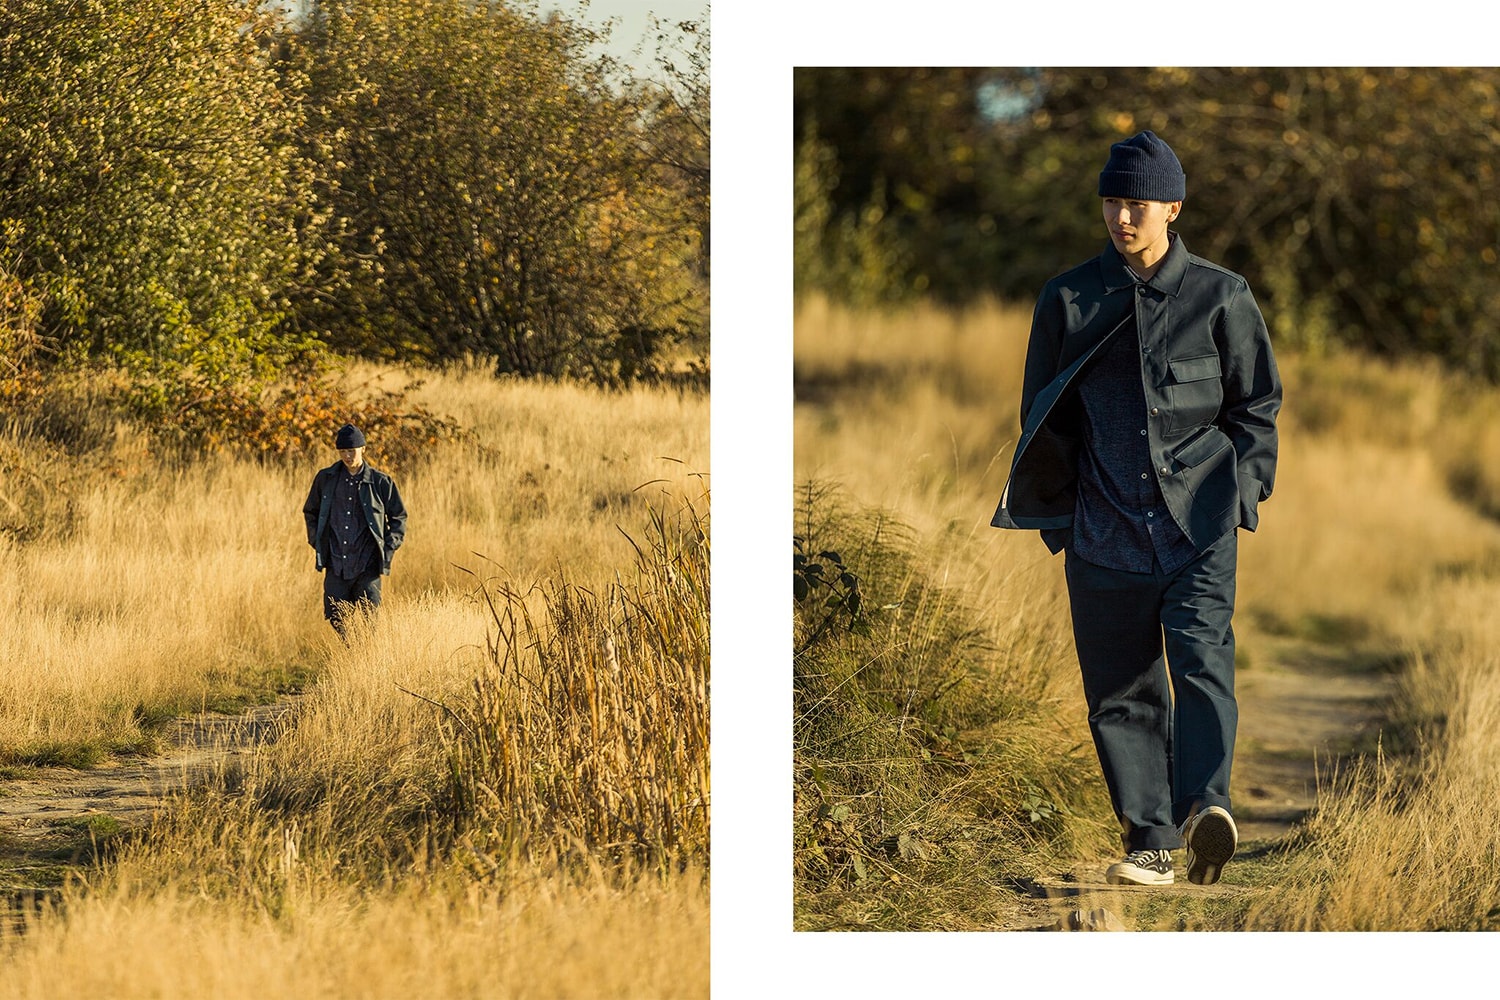 Livestock illustrated example Fall Winter 2017 Editorial Collection